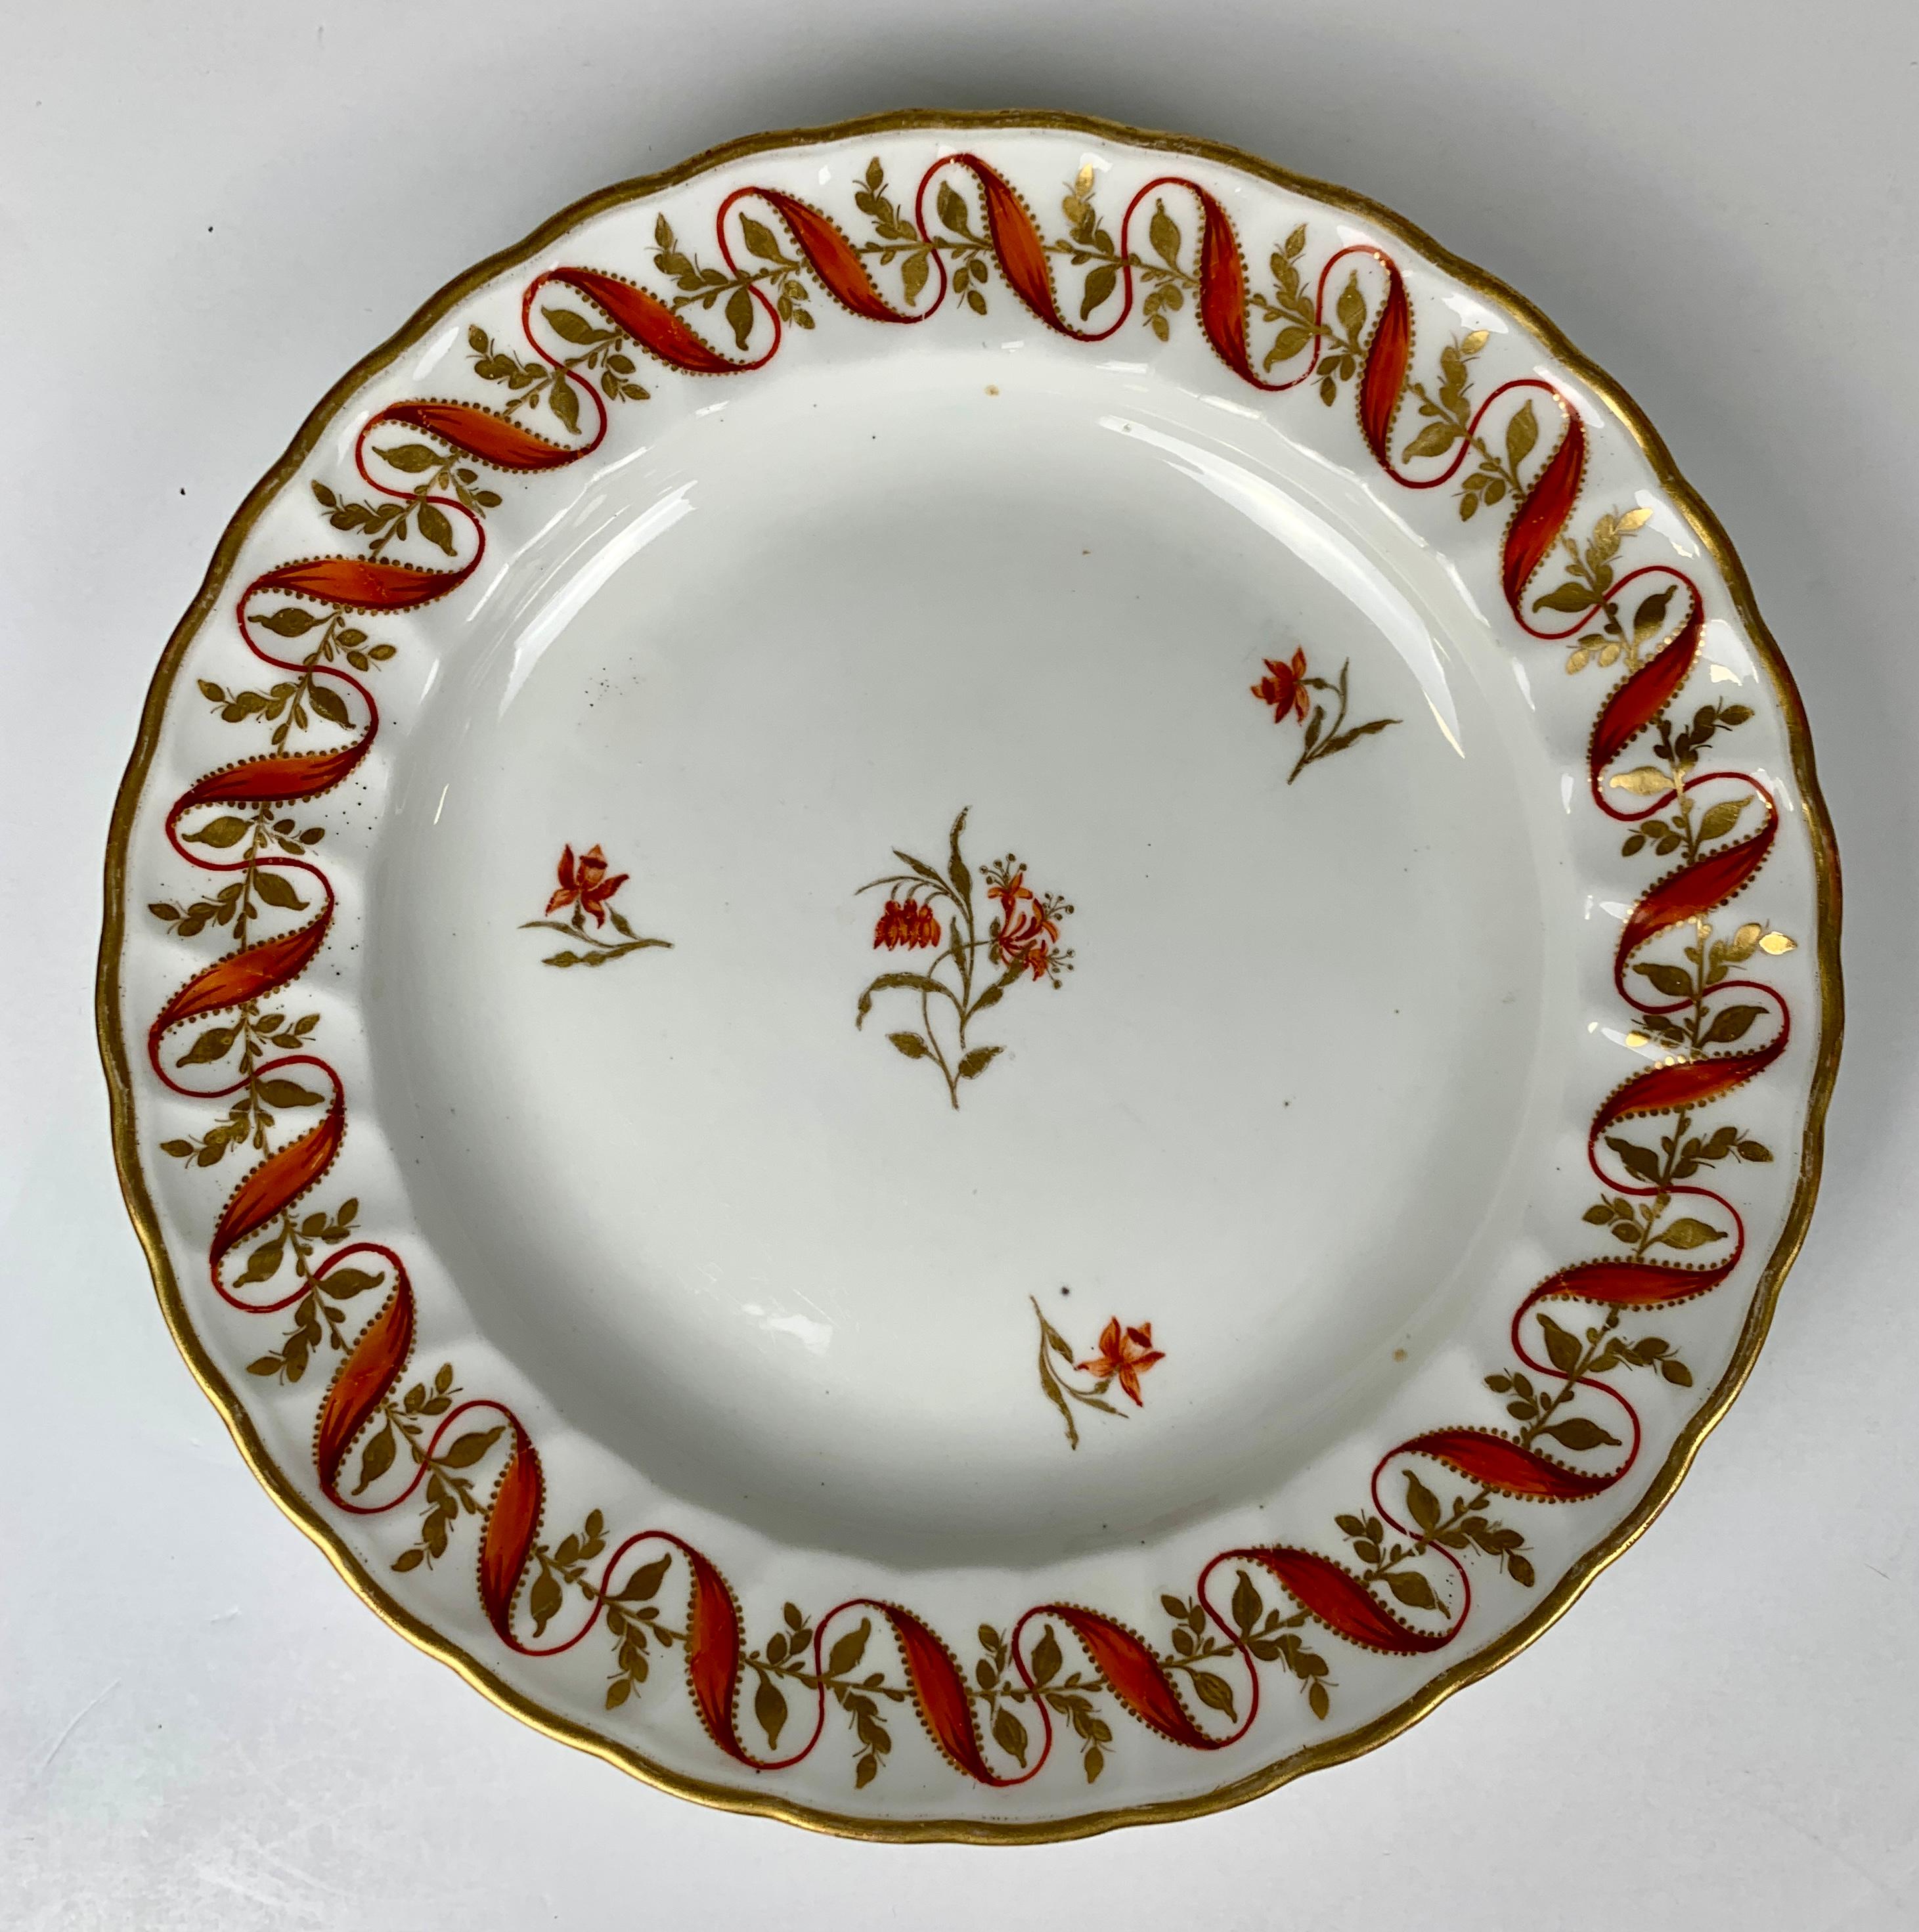 Regency Set Four Antique Porcelain Dishes Hand-Painted 18th Century England, circa 1790 For Sale